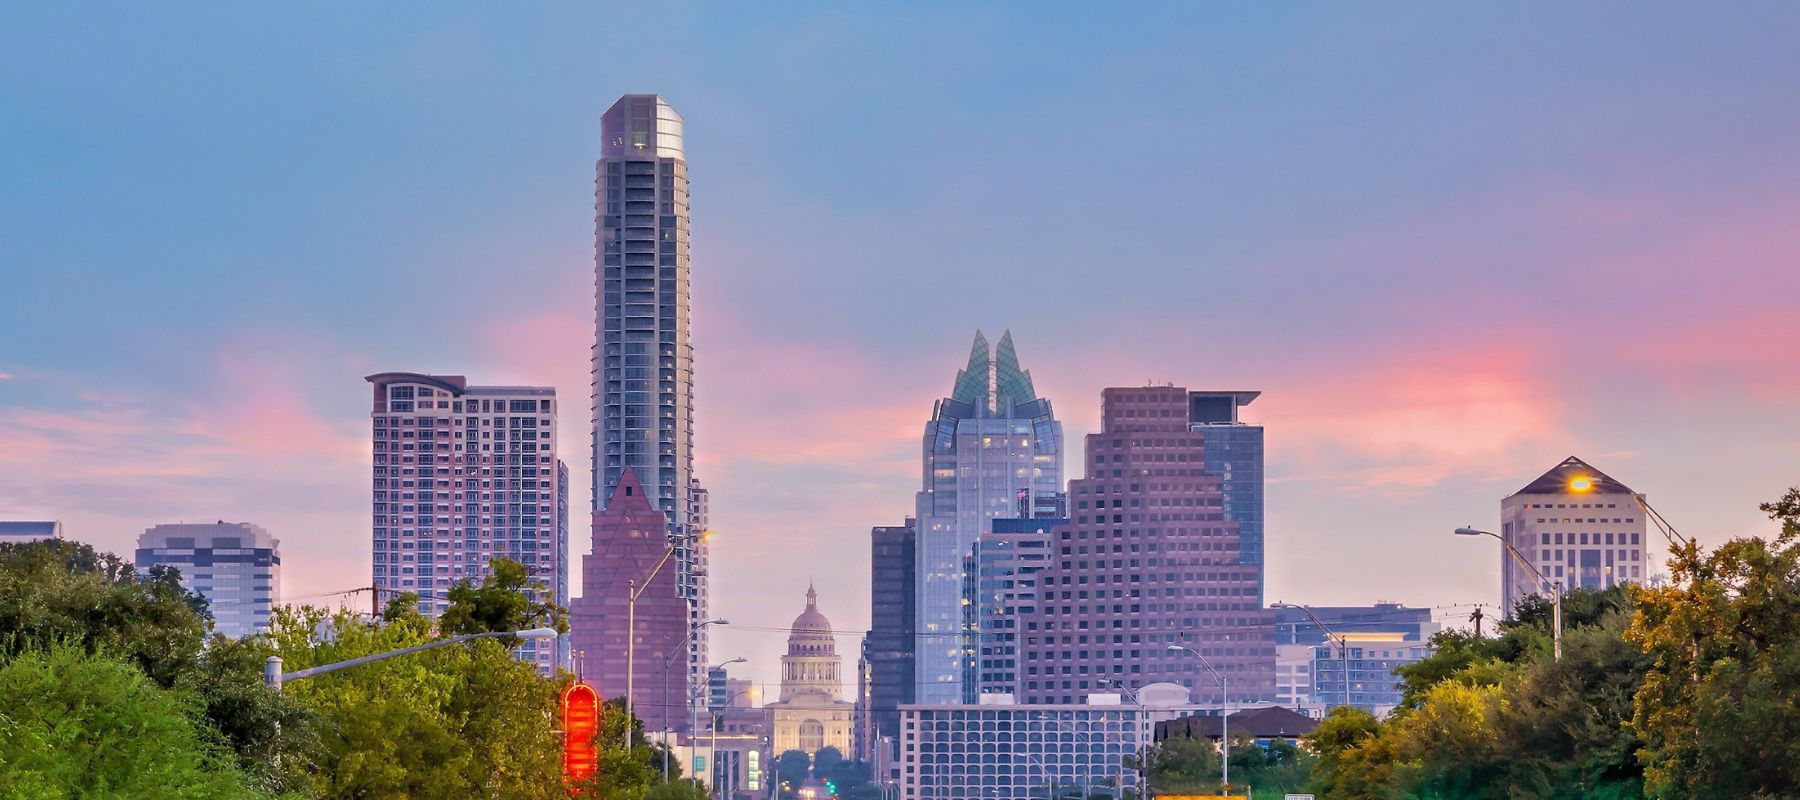 wide view of south austin tall buildings